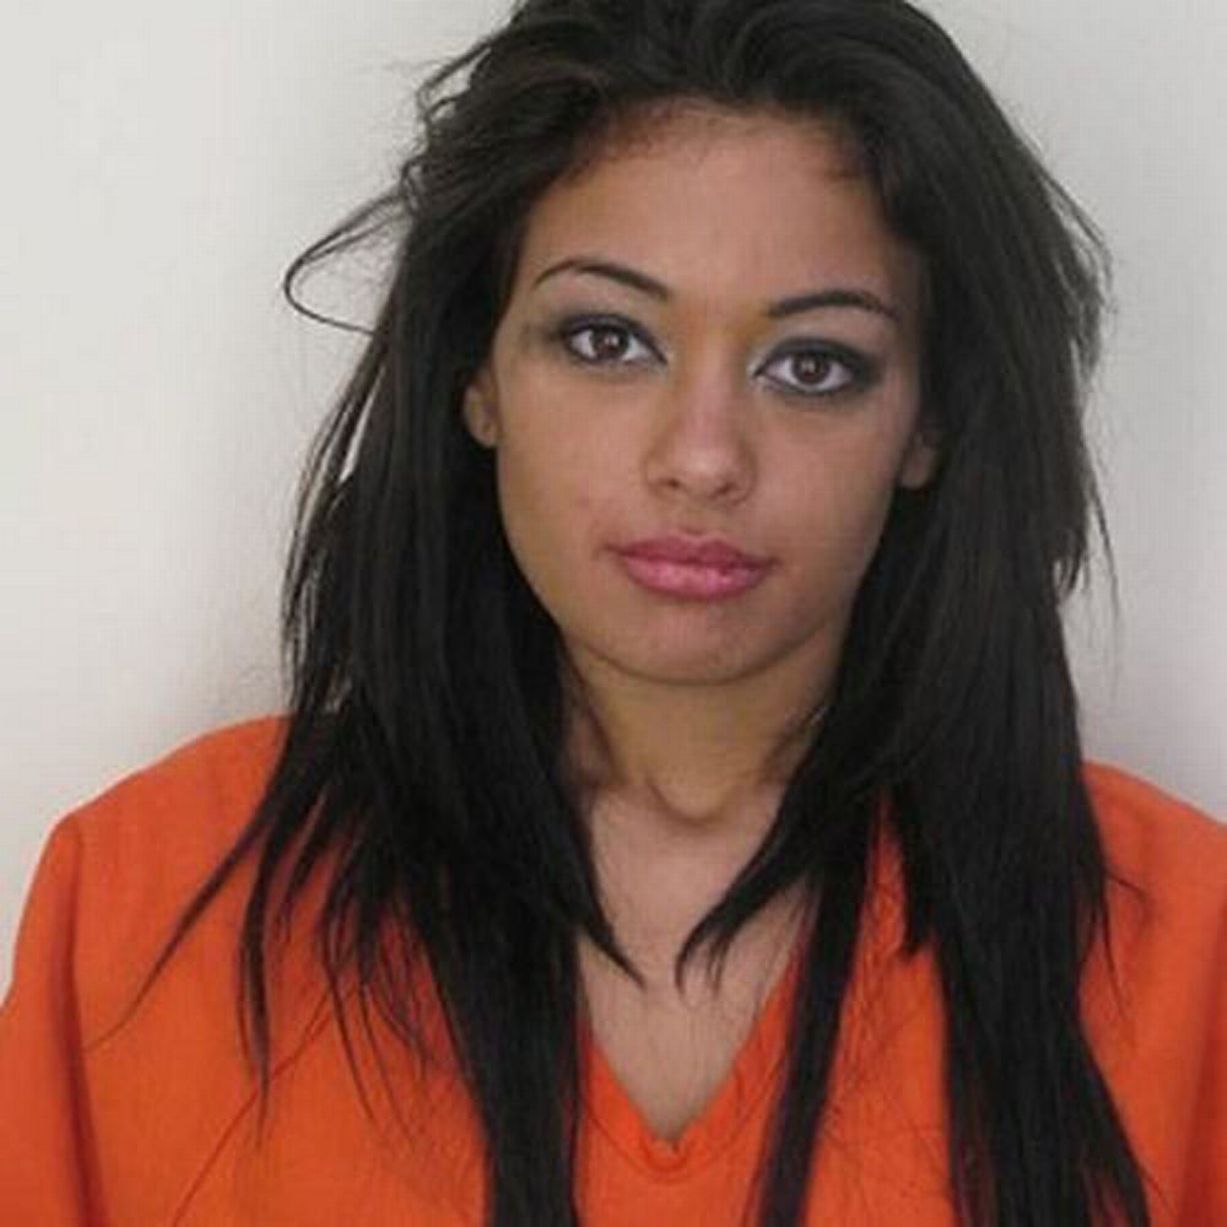 Girls That You'd Want To Go To Jail With